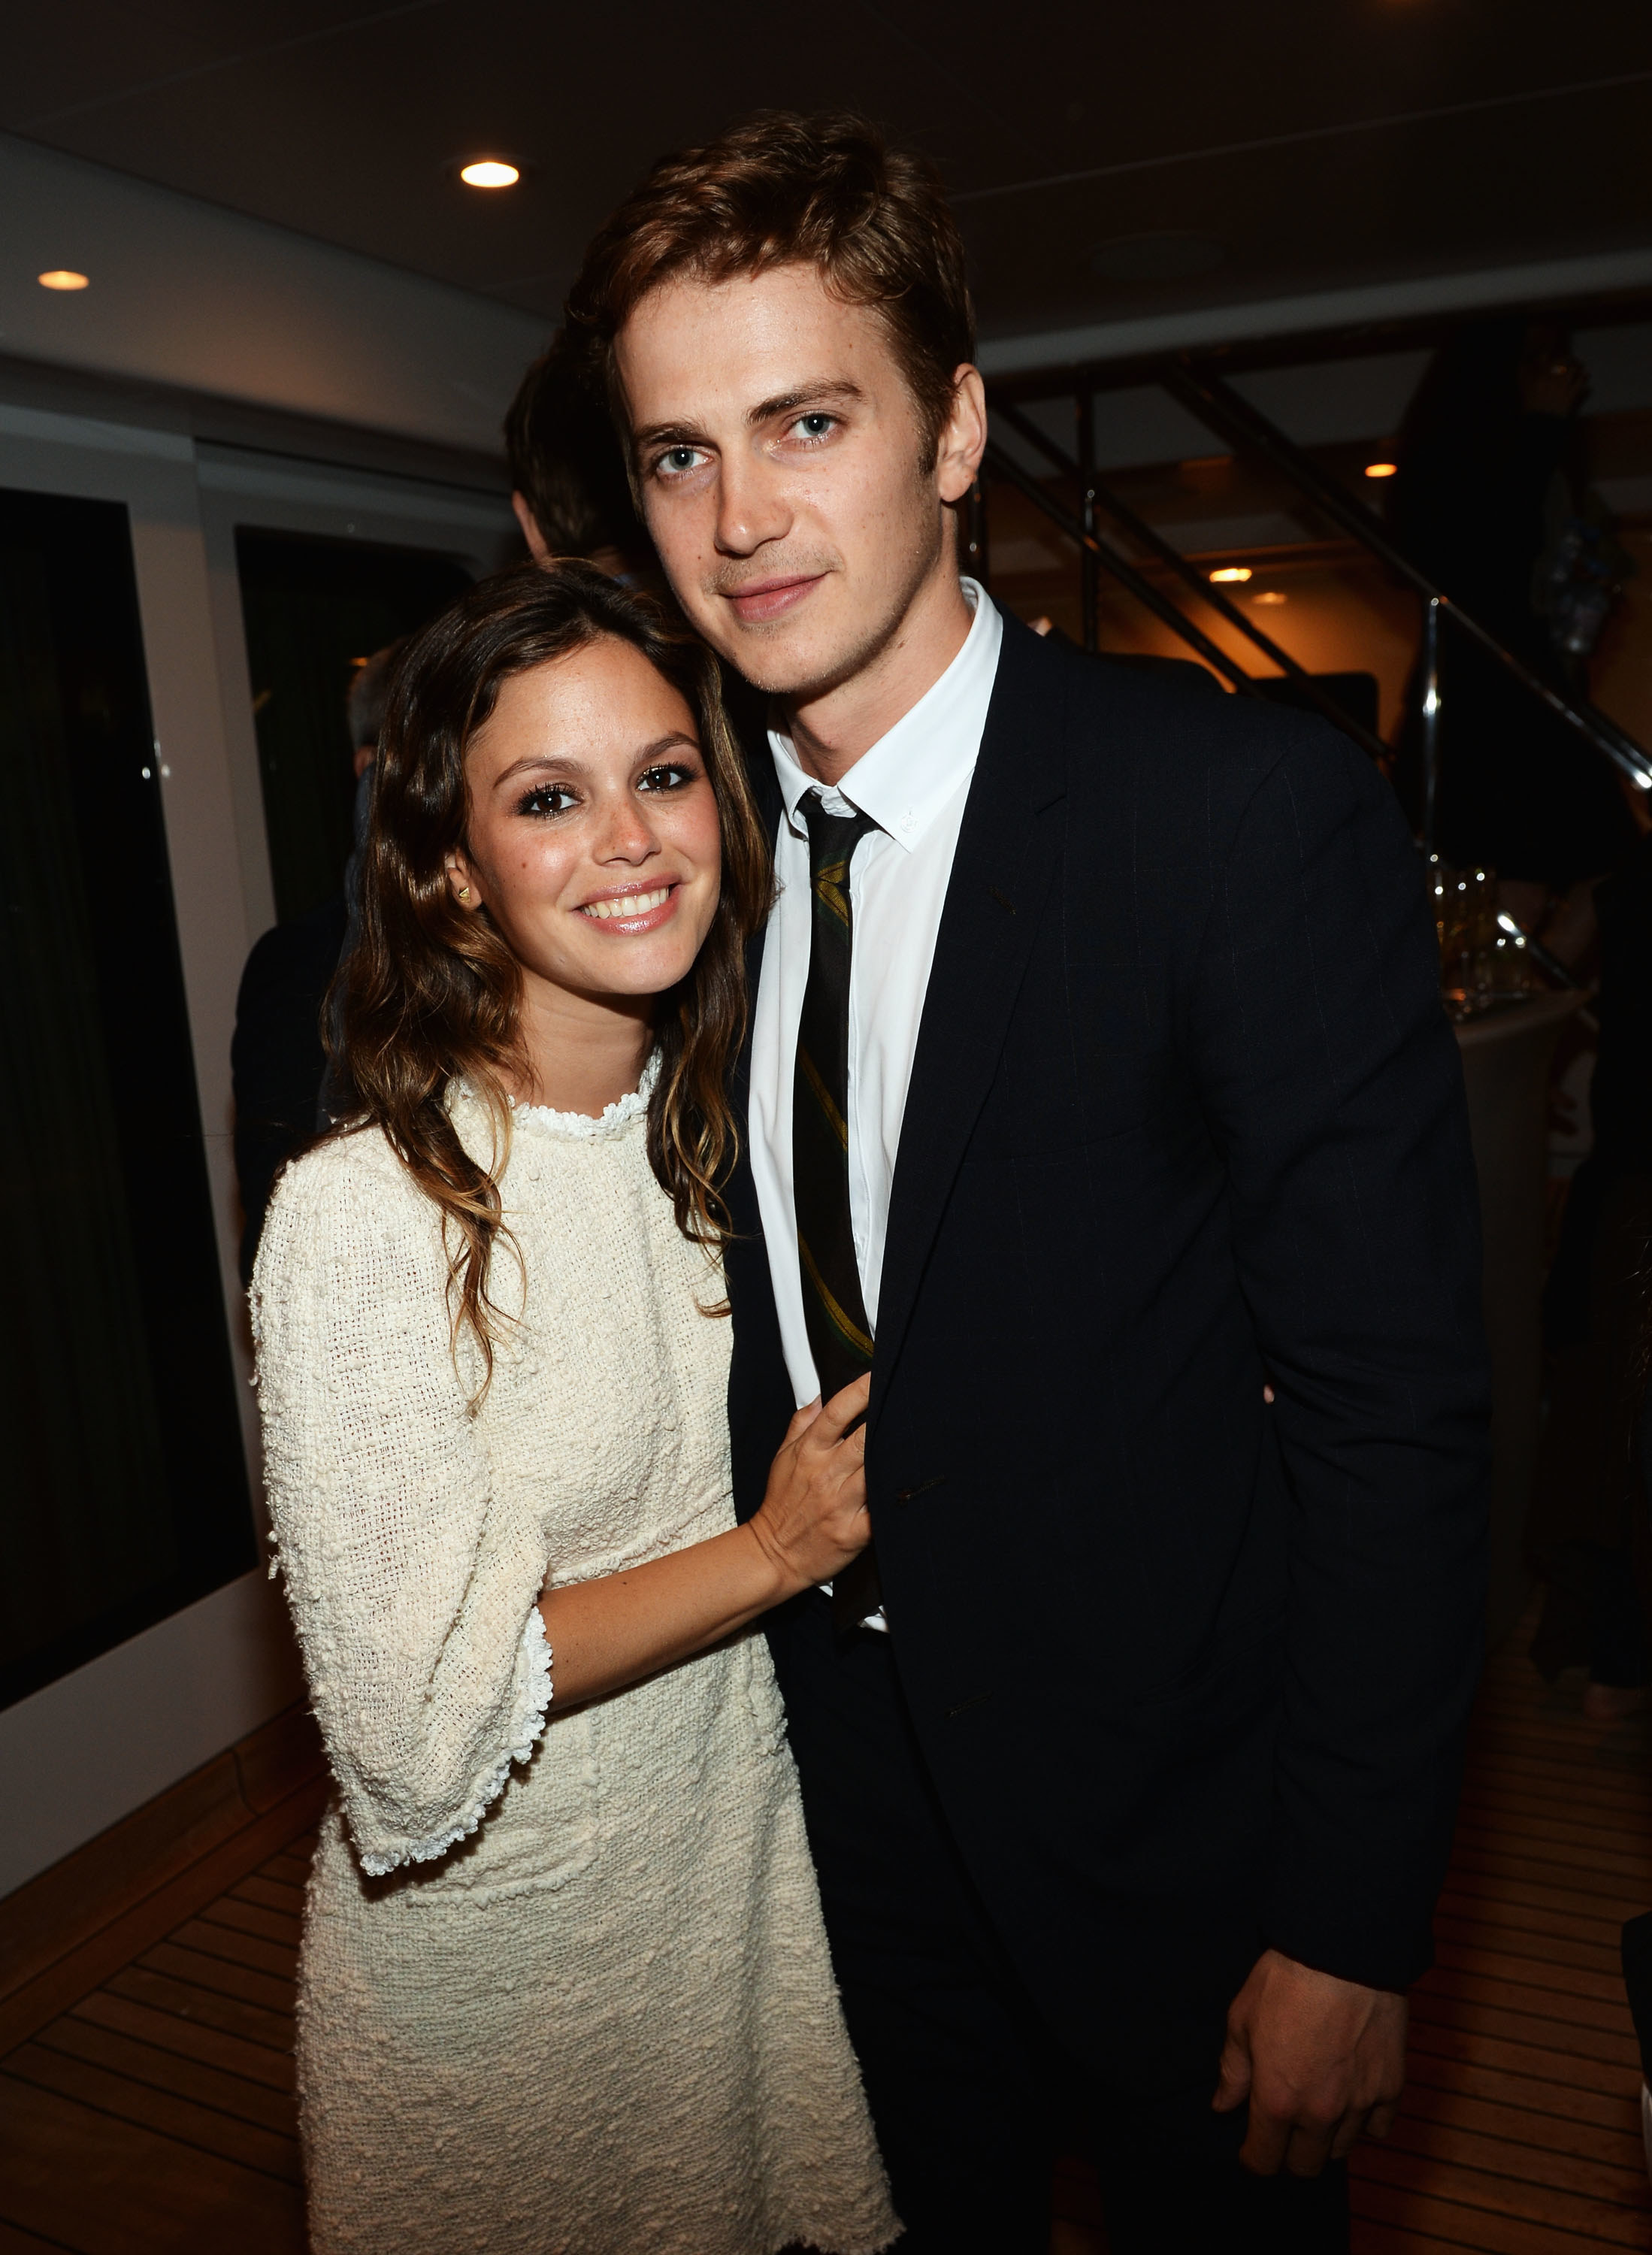 Rachel Bilson and Hayden Christensen are seen at a launch party for Glacier Films on May 19, 2013